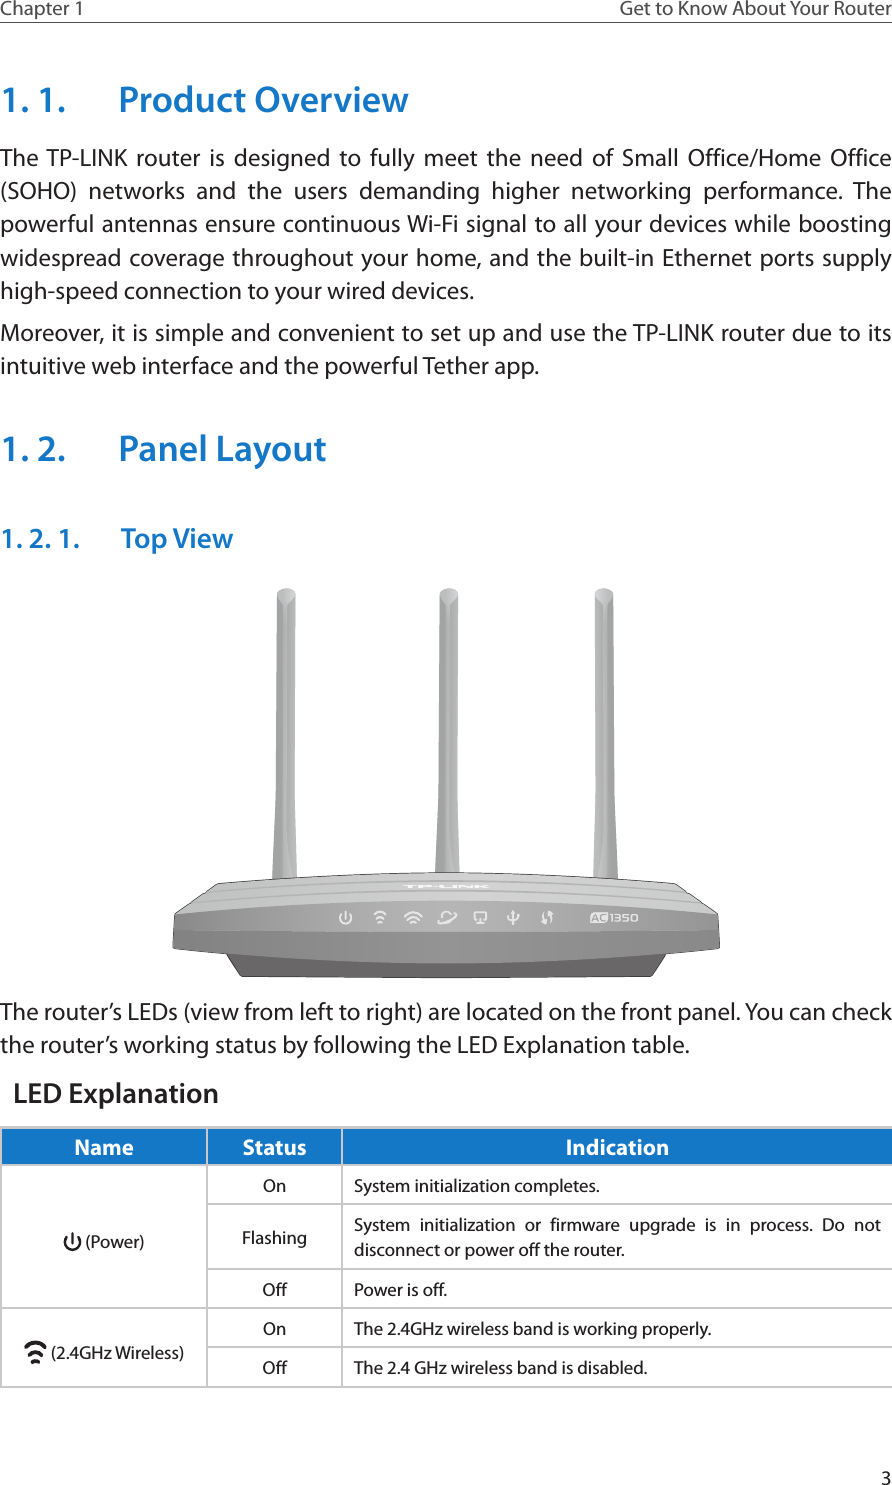 3Chapter 1 Get to Know About Your Router1. 1.  Product OverviewThe TP-LINK router is designed to fully meet the need of Small Office/Home Office (SOHO) networks and the users demanding higher networking performance. The powerful antennas ensure continuous Wi-Fi signal to all your devices while boosting widespread coverage throughout your home, and the built-in Ethernet ports supply high-speed connection to your wired devices.Moreover, it is simple and convenient to set up and use the TP-LINK router due to its intuitive web interface and the powerful Tether app.1. 2.  Panel Layout1. 2. 1.  Top ViewThe router’s LEDs (view from left to right) are located on the front panel. You can check the router’s working status by following the LED Explanation table.LED ExplanationName Status Indication (Power)On System initialization completes.Flashing System initialization or firmware upgrade is in process. Do not disconnect or power off the router.Off Power is off. (2.4GHz Wireless)On The 2.4GHz wireless band is working properly.Off The 2.4 GHz wireless band is disabled.